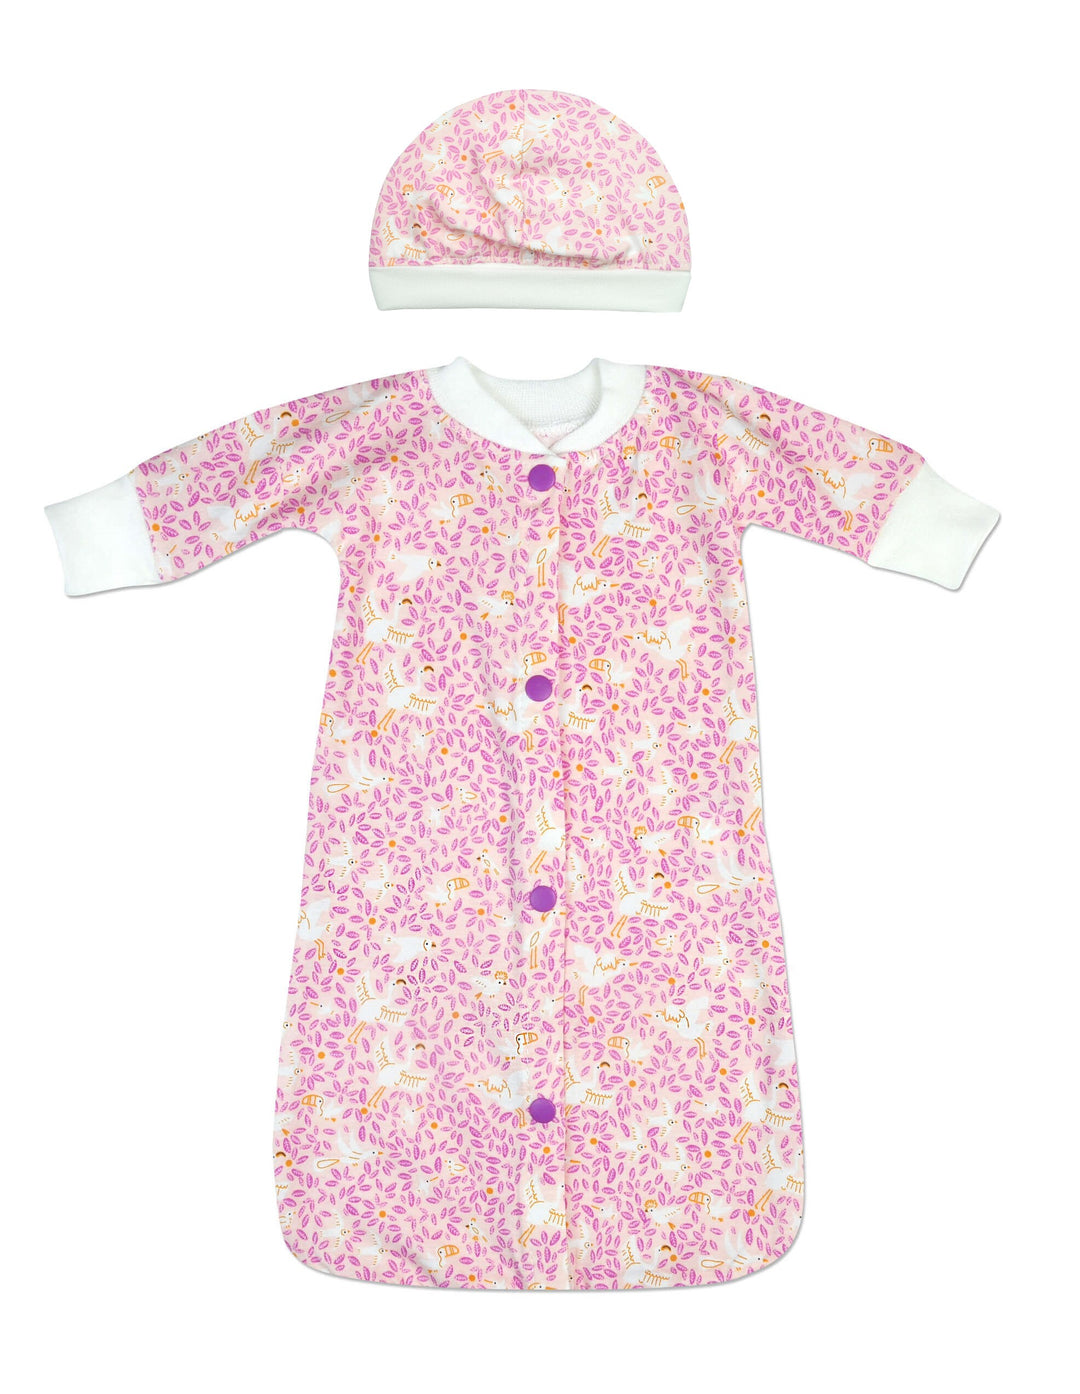 These simple gowns are great little sleepers for preemies. The plastic snaps work great inside and outside the NICU. A matching cap, helps keep your little one warm.